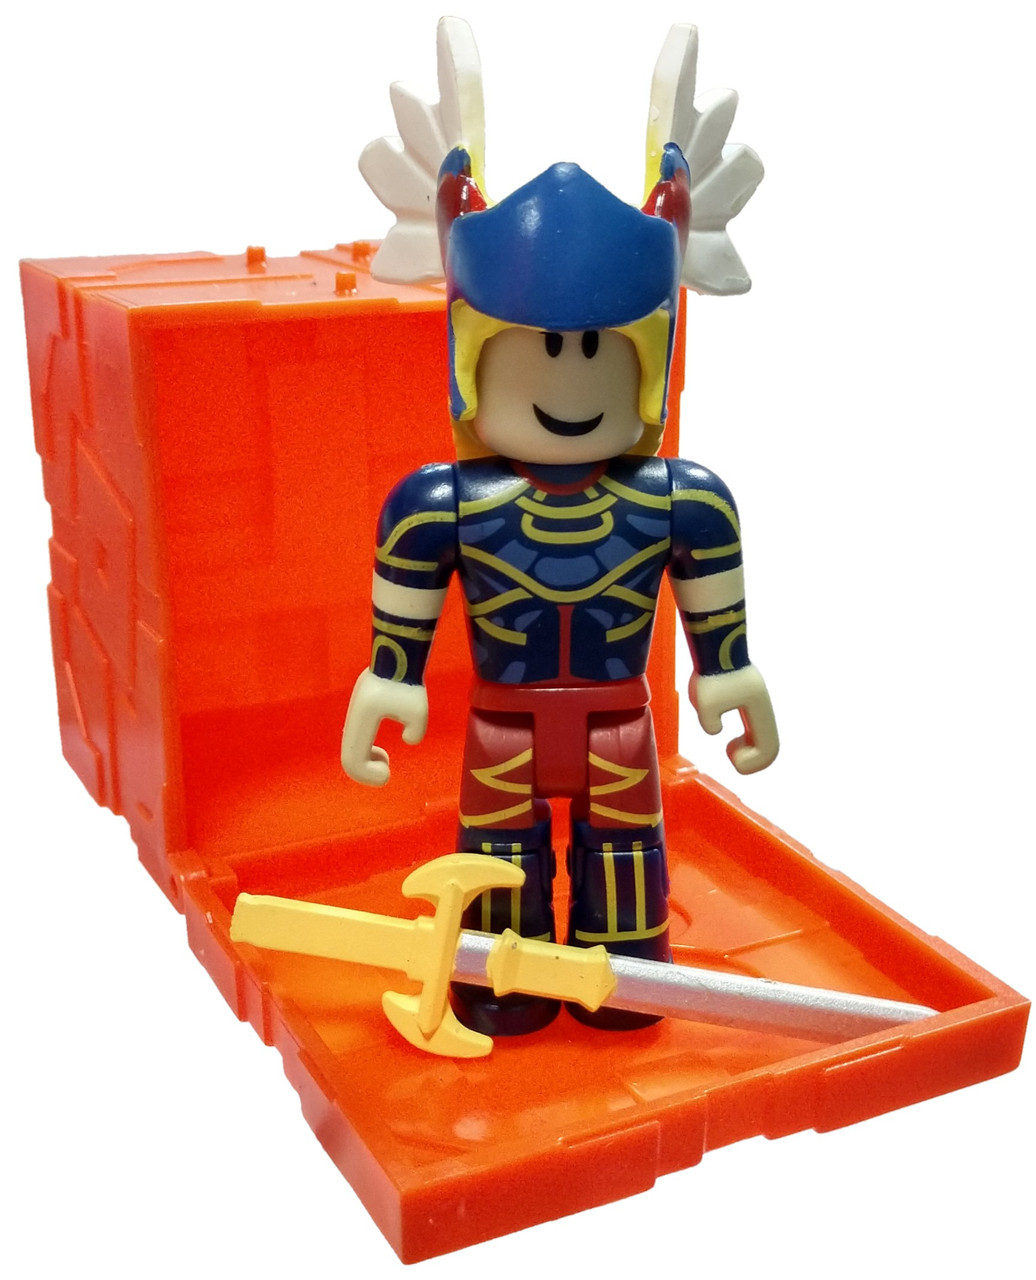 Roblox Series 6 Summoner Tycoon Valkyrie 3 Mini Figure With Orange Cube And Online Code Loose Jazwares Toywiz - summoner war tycoon on roblox